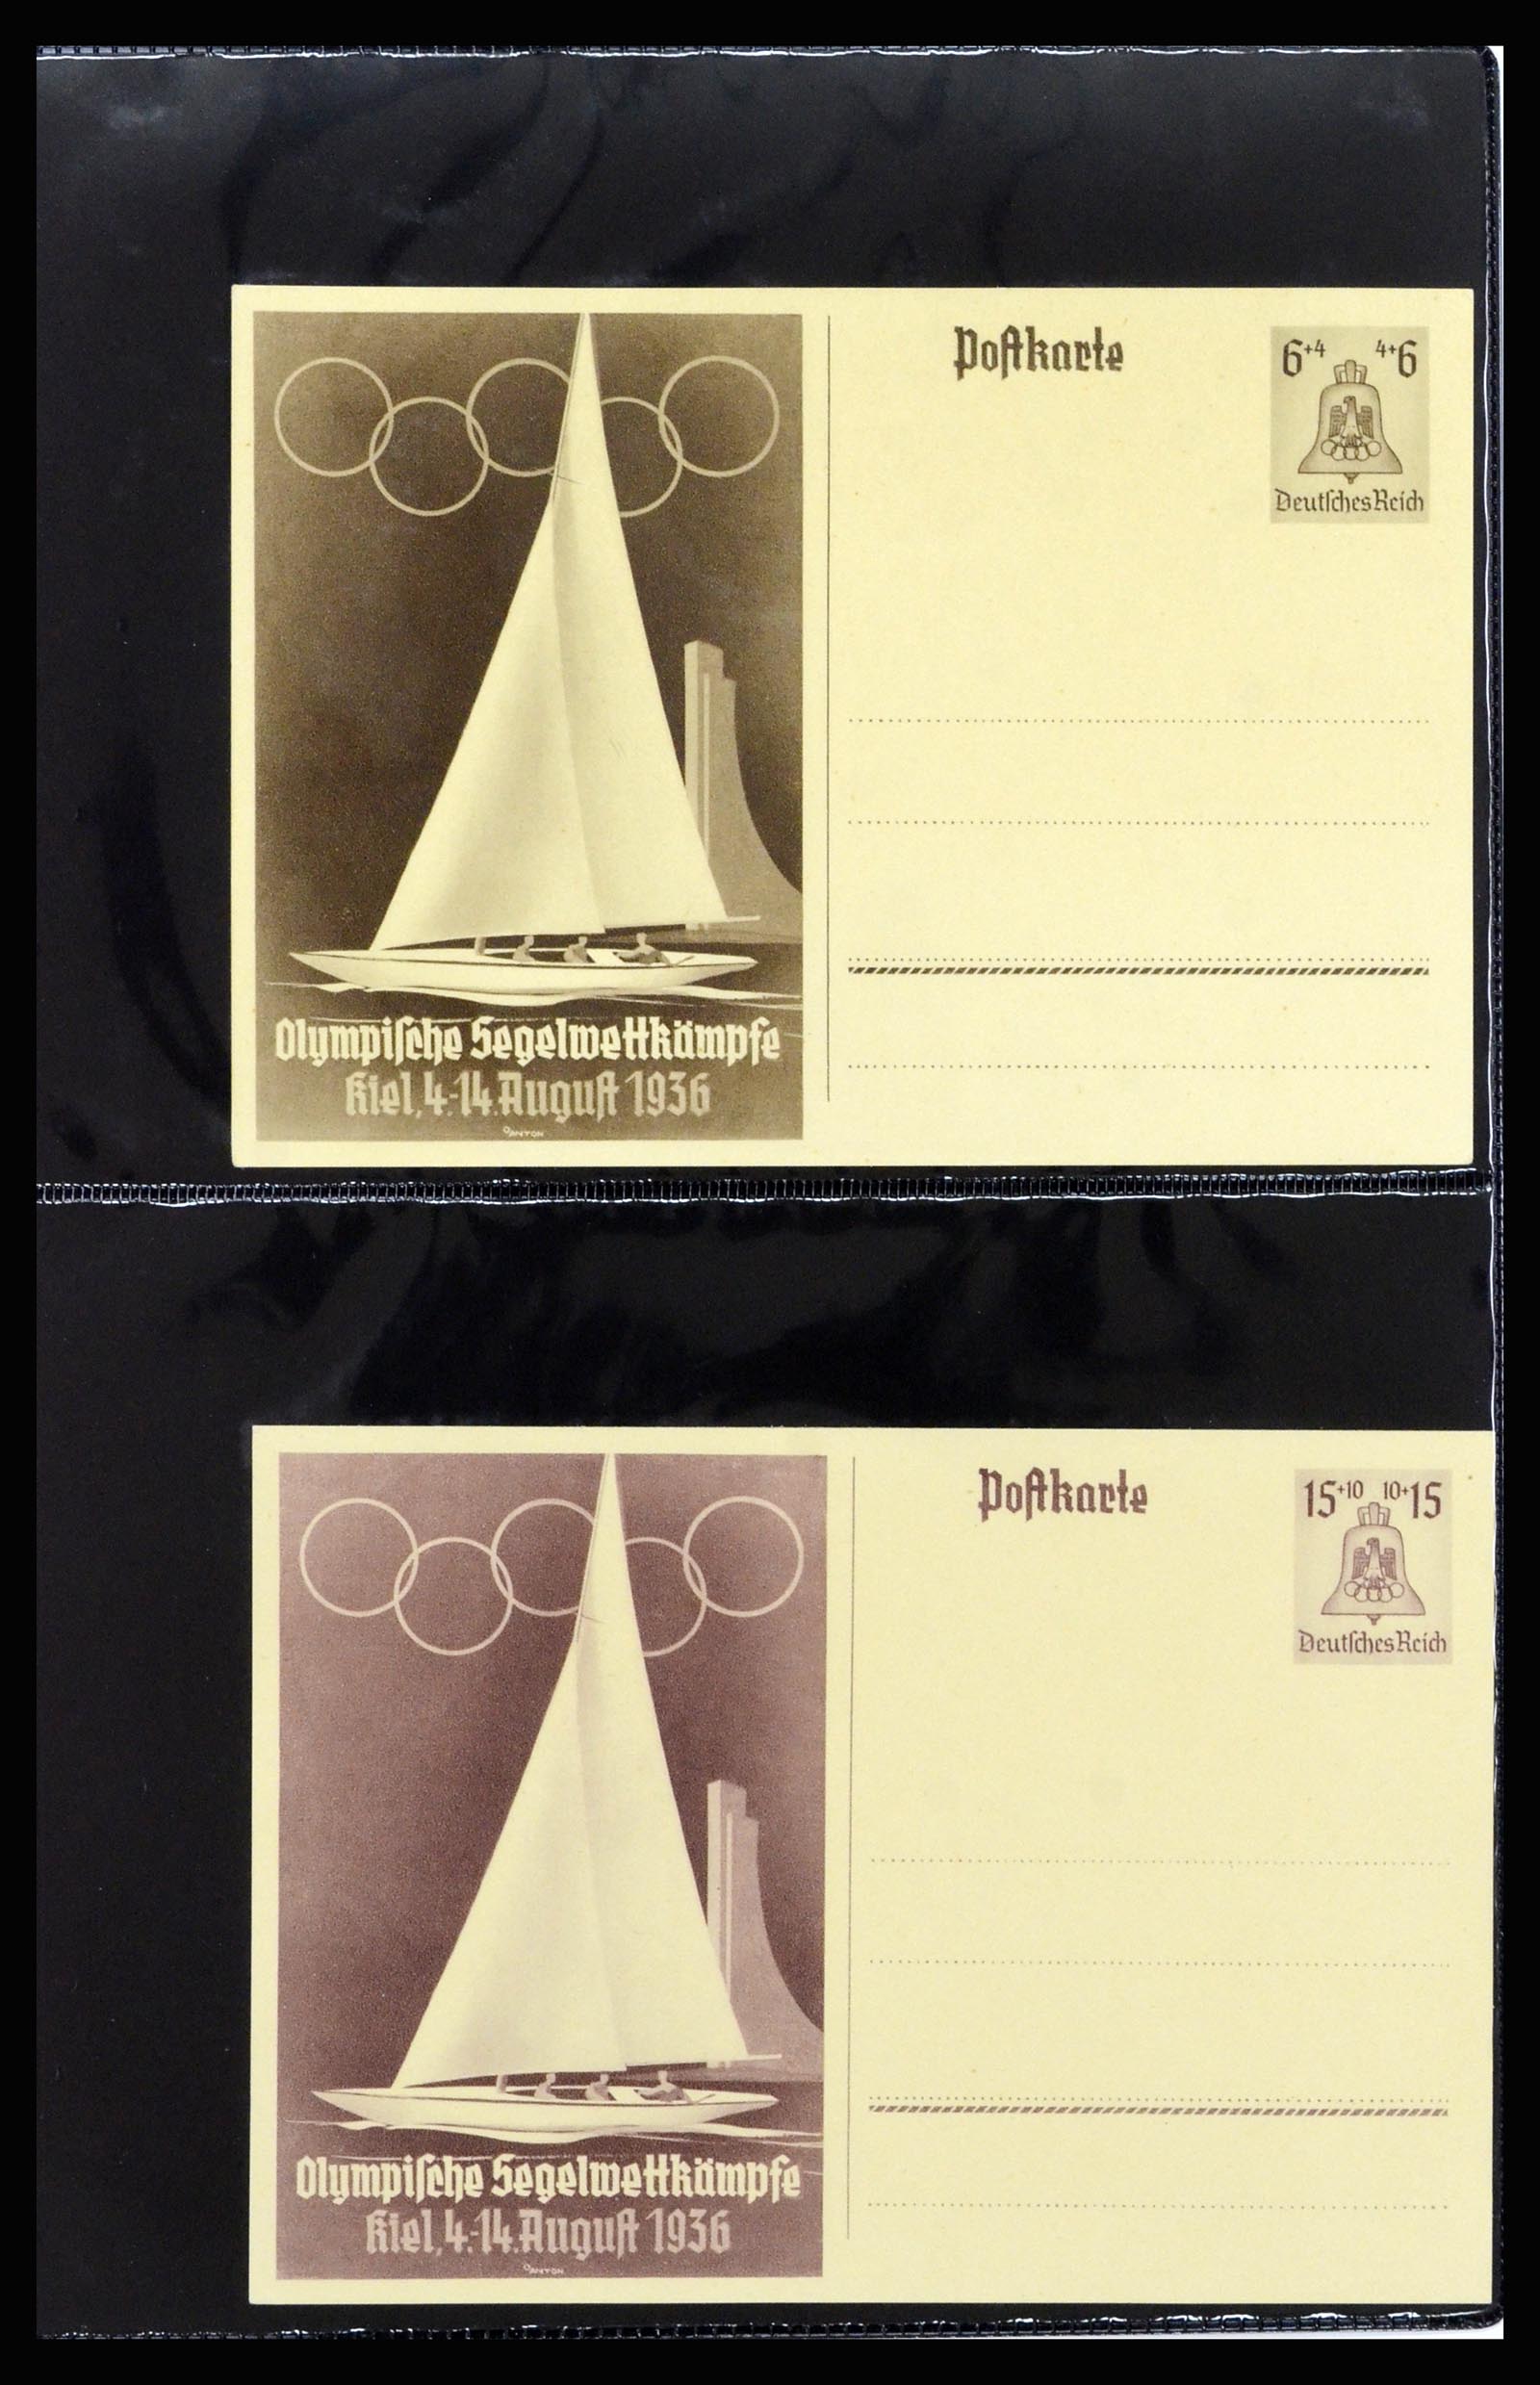 37118 016 - Stamp collection 37118 Olympics 1936.